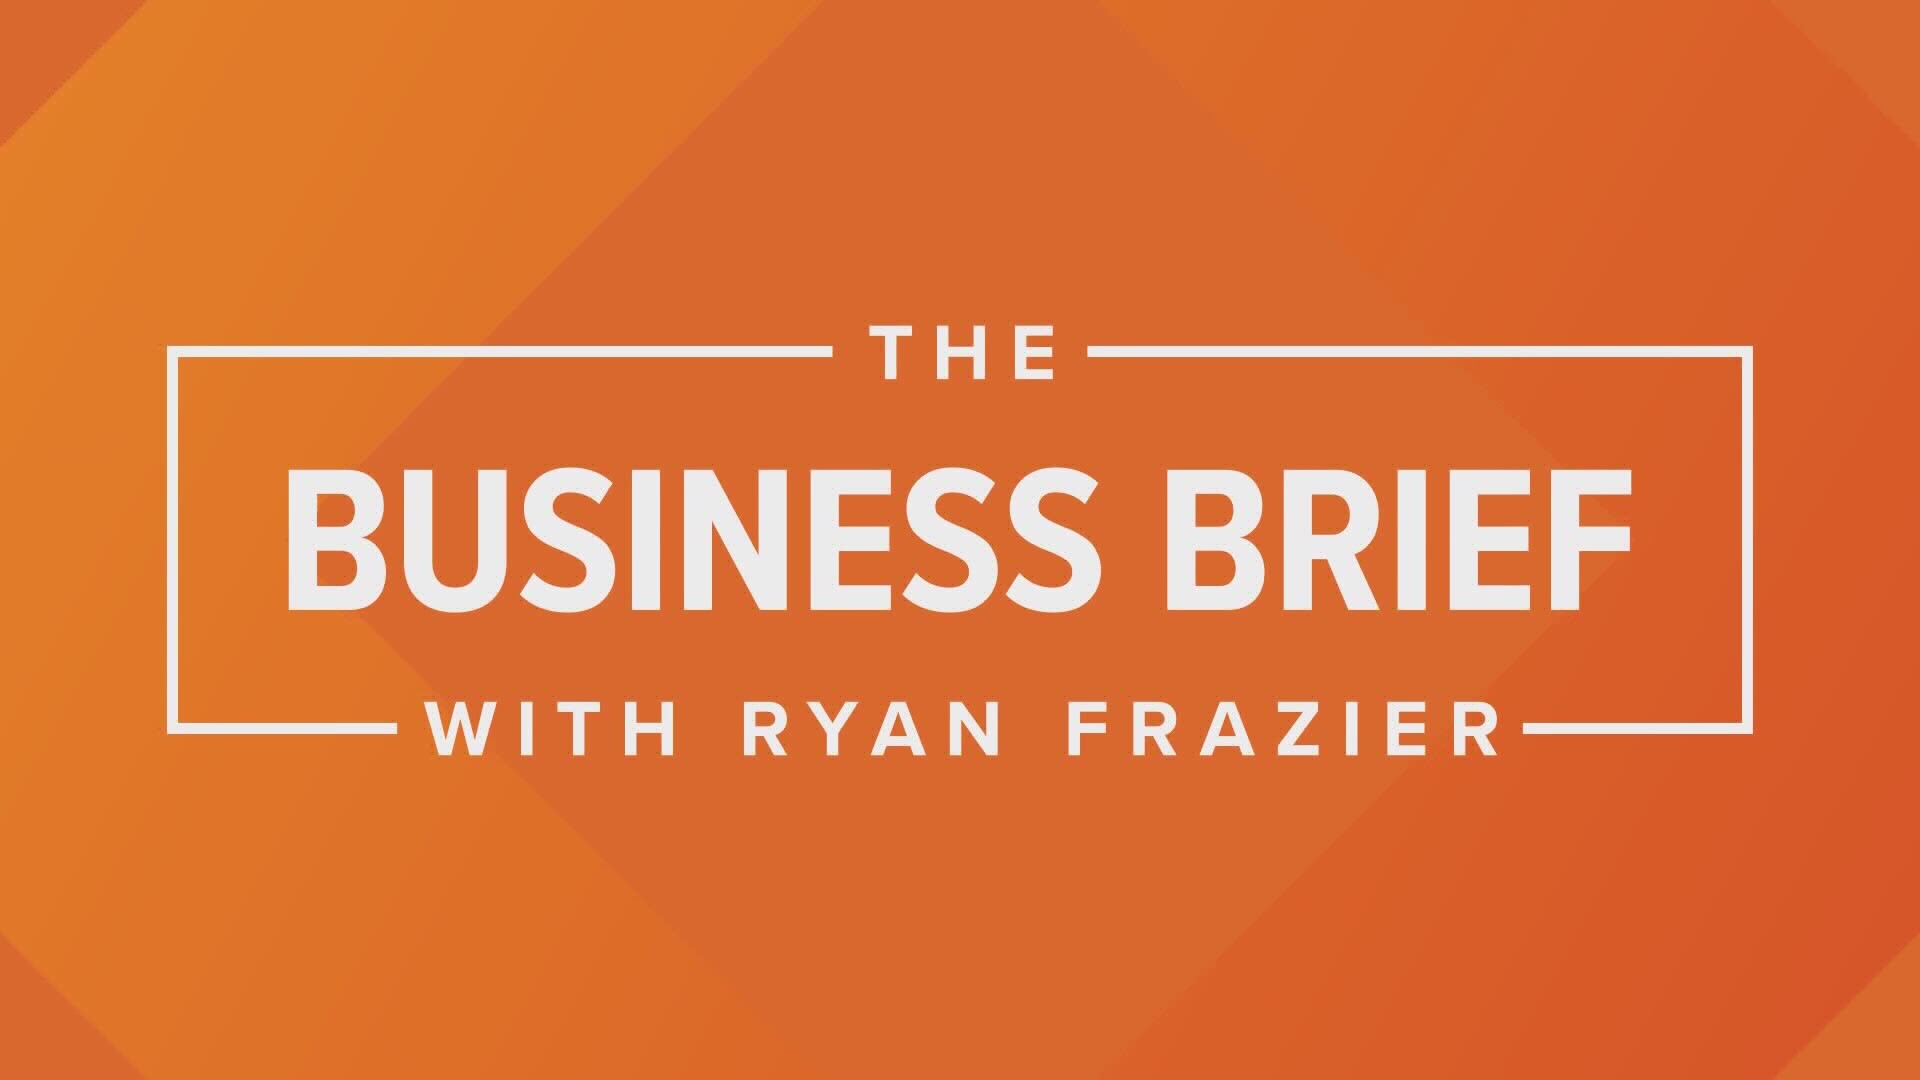 Business brief host Ryan Frazier interviews Nick Jurgens, managing partner with Madison Commercial Properties, on Colorado's 2021 commercial real estate outlook.